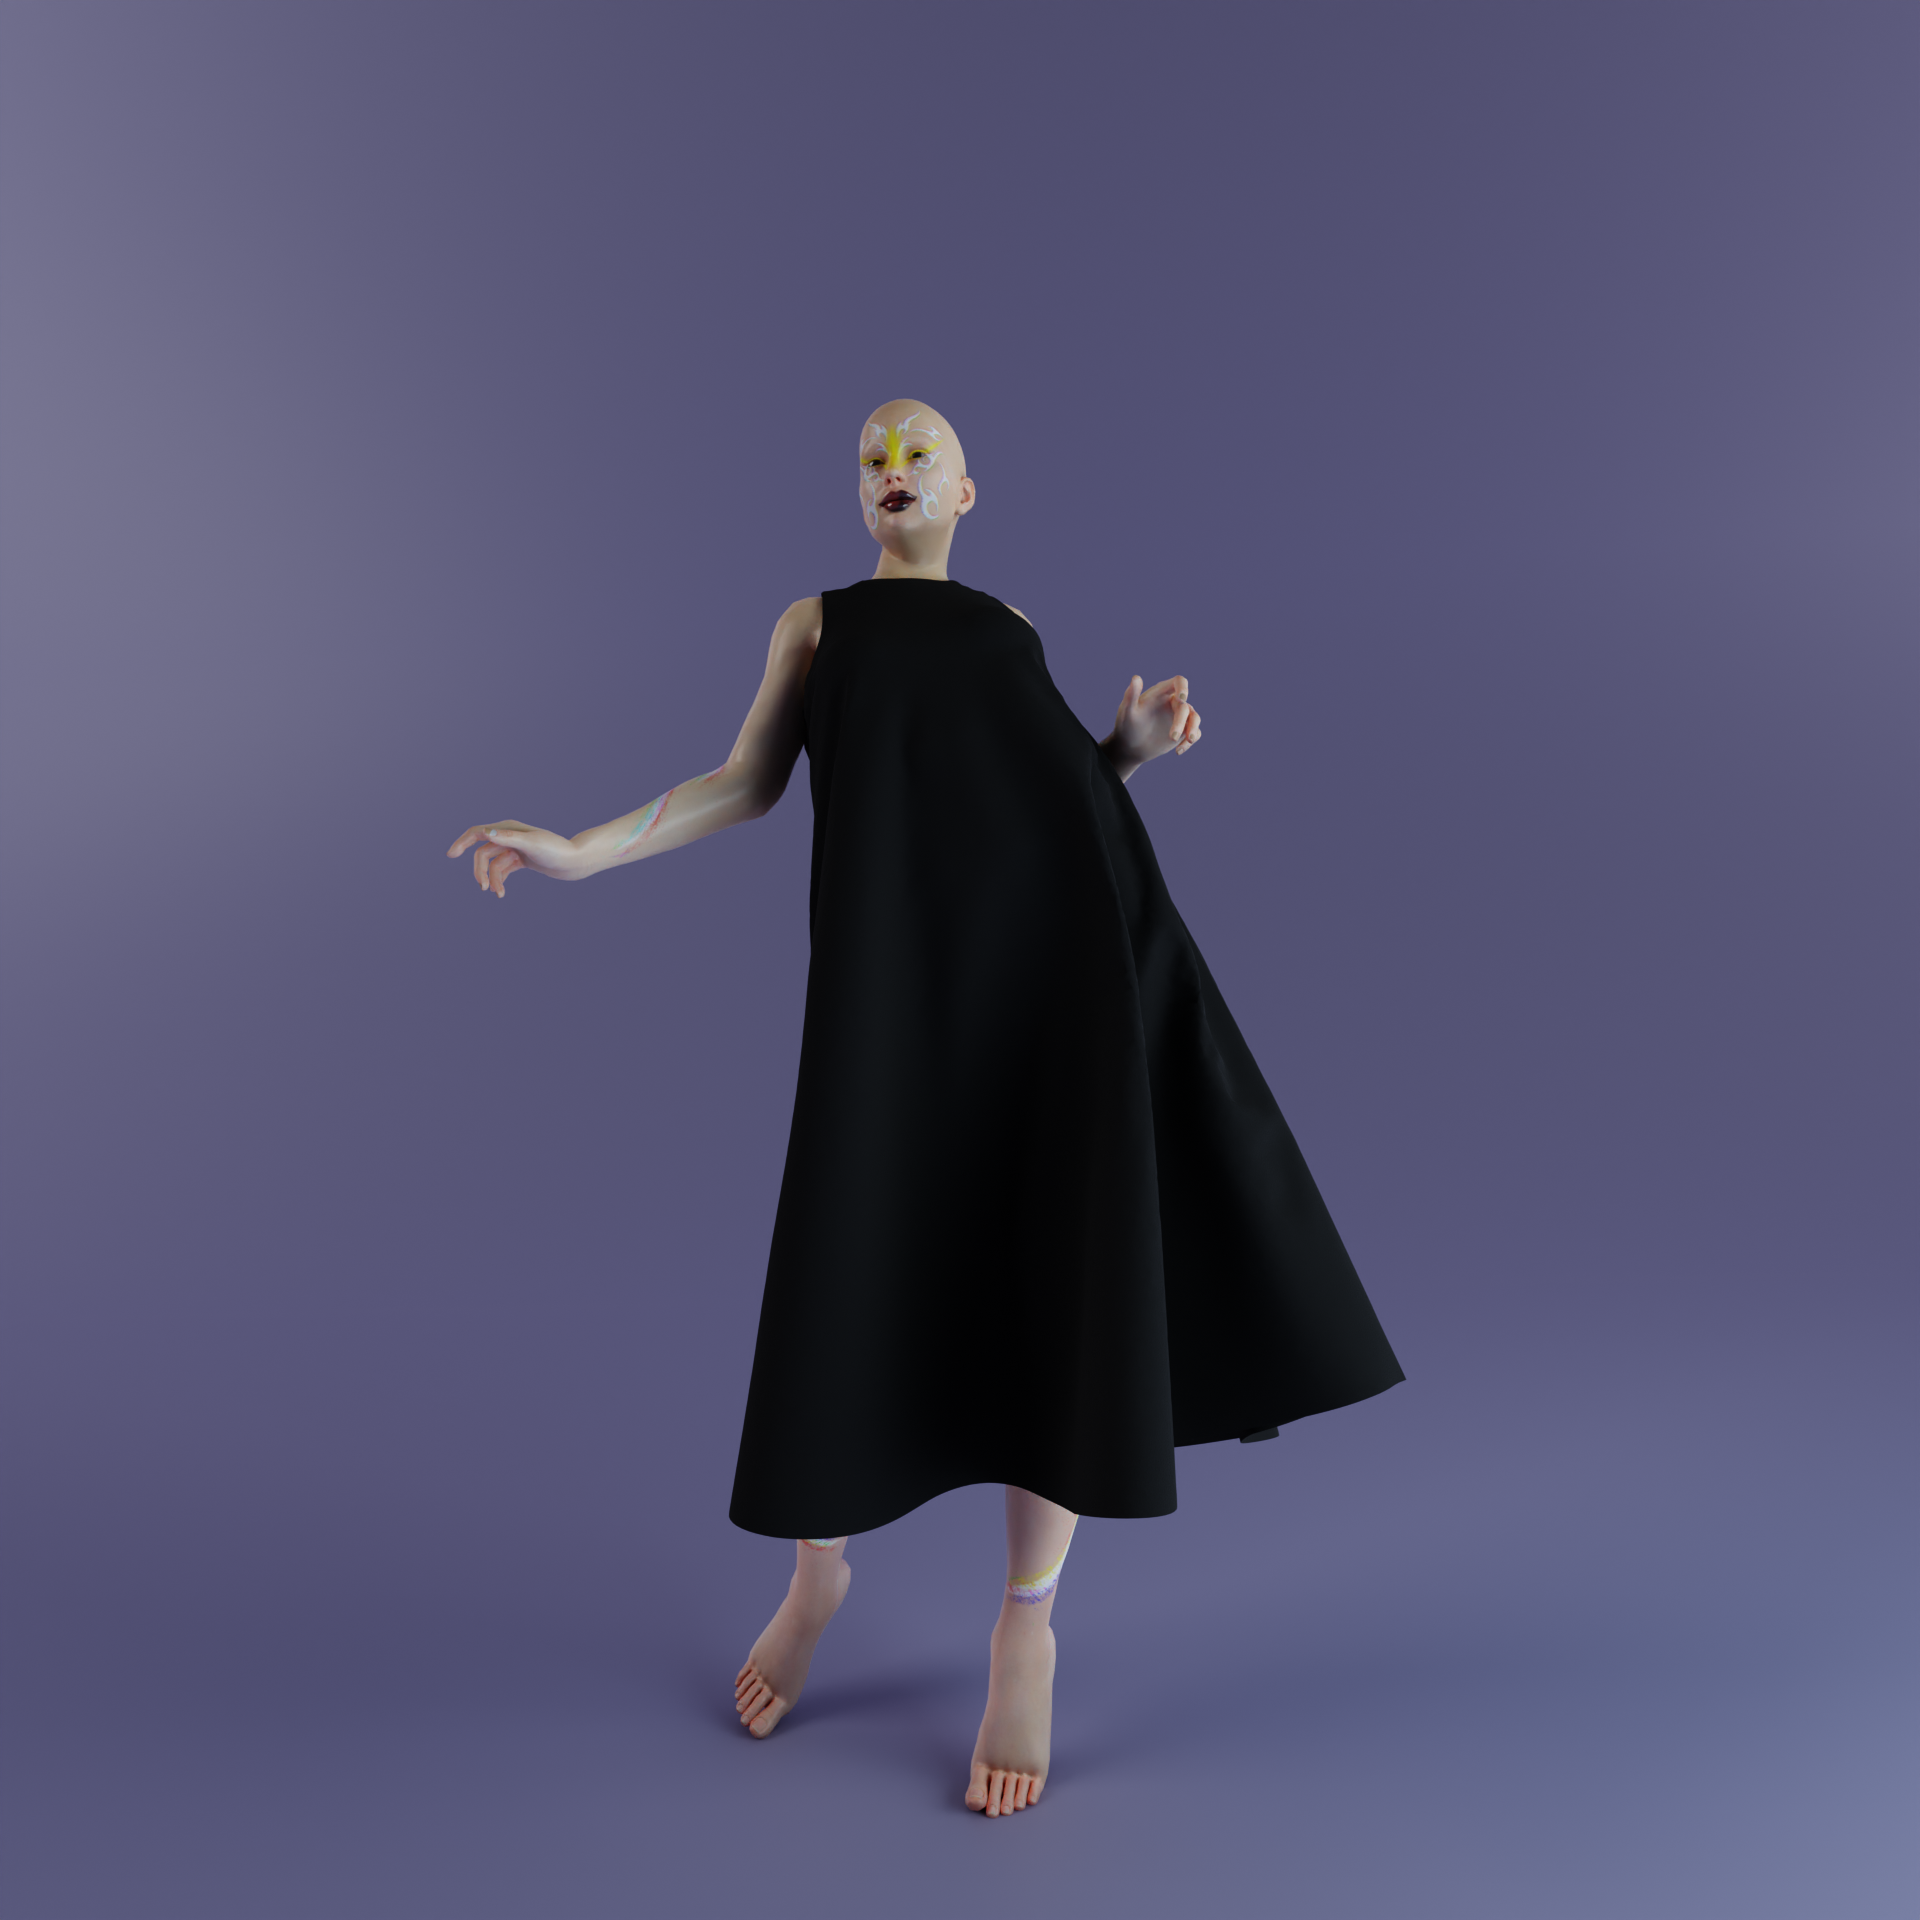 Purple background with elongated mannequin figure in long black dress.